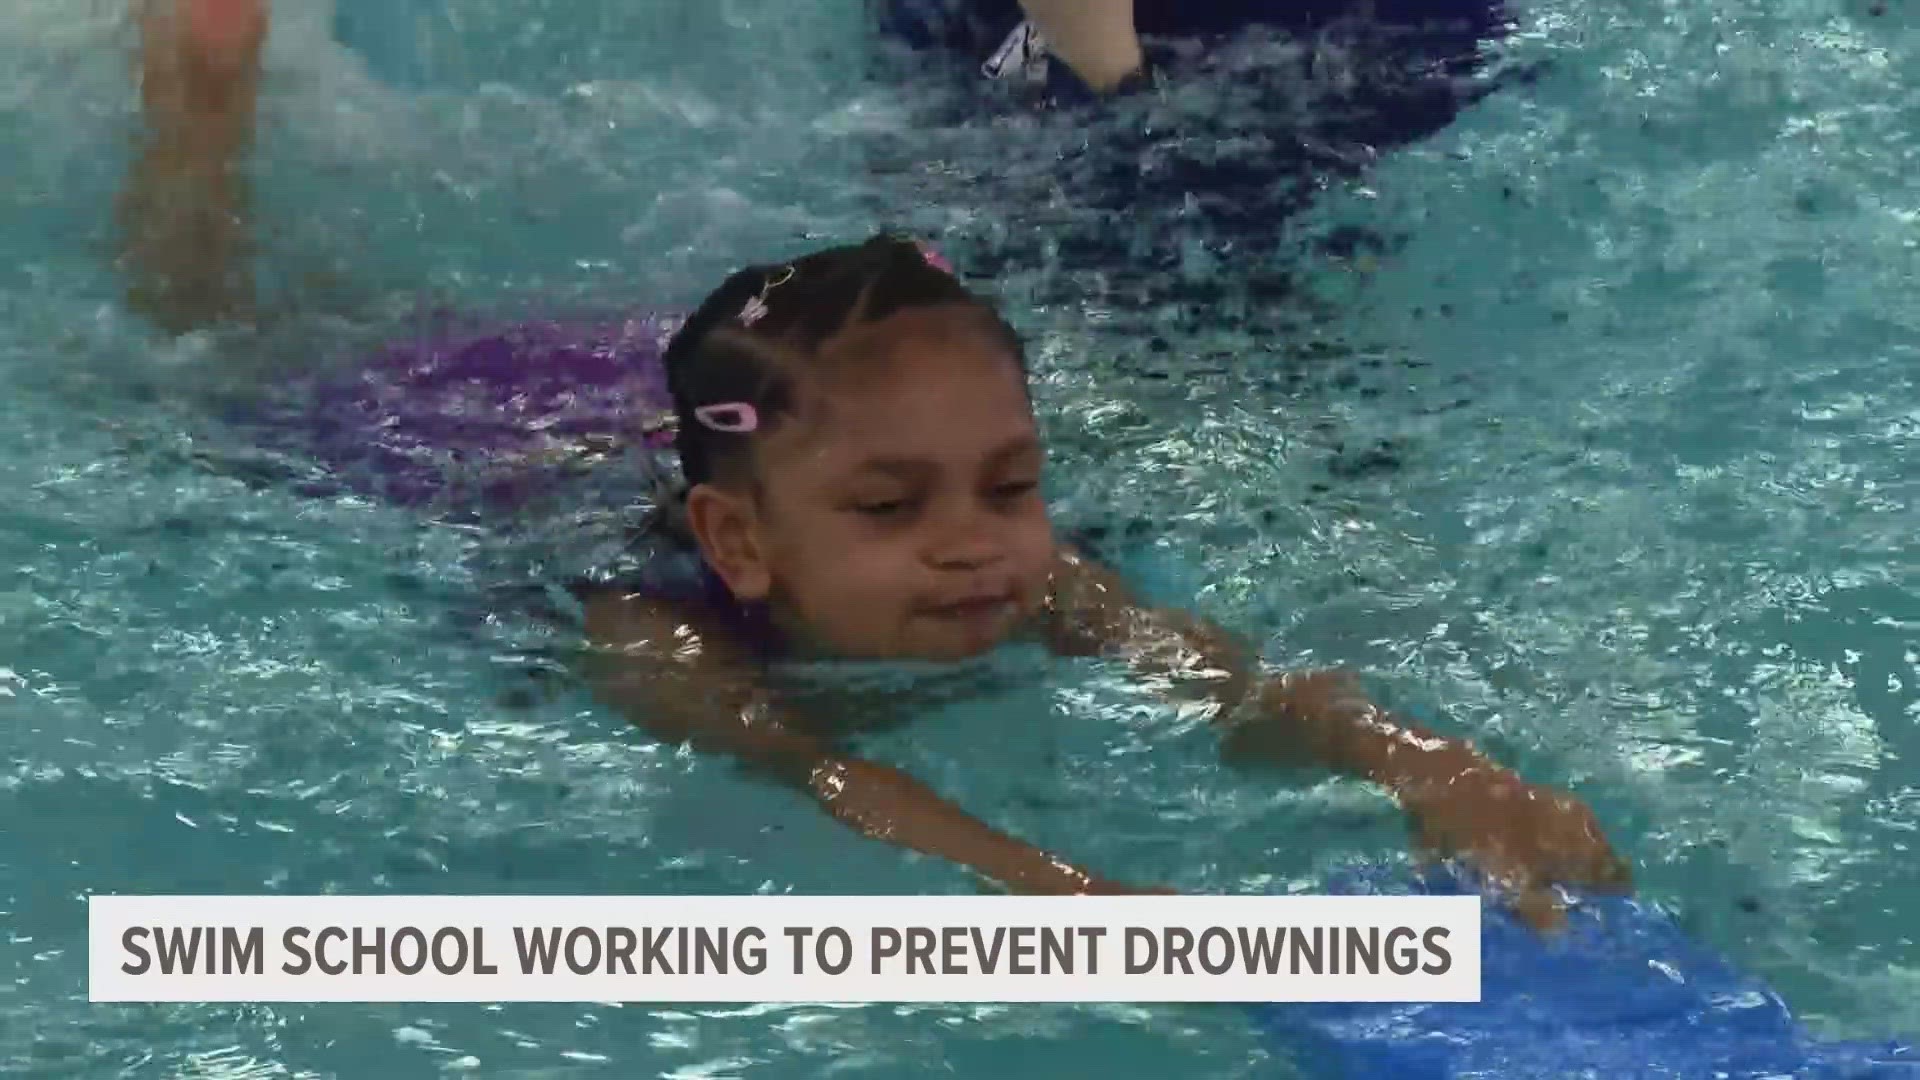 Aqua-Tots Swim school says kids can start taking swim lessons as early as 4 months old.